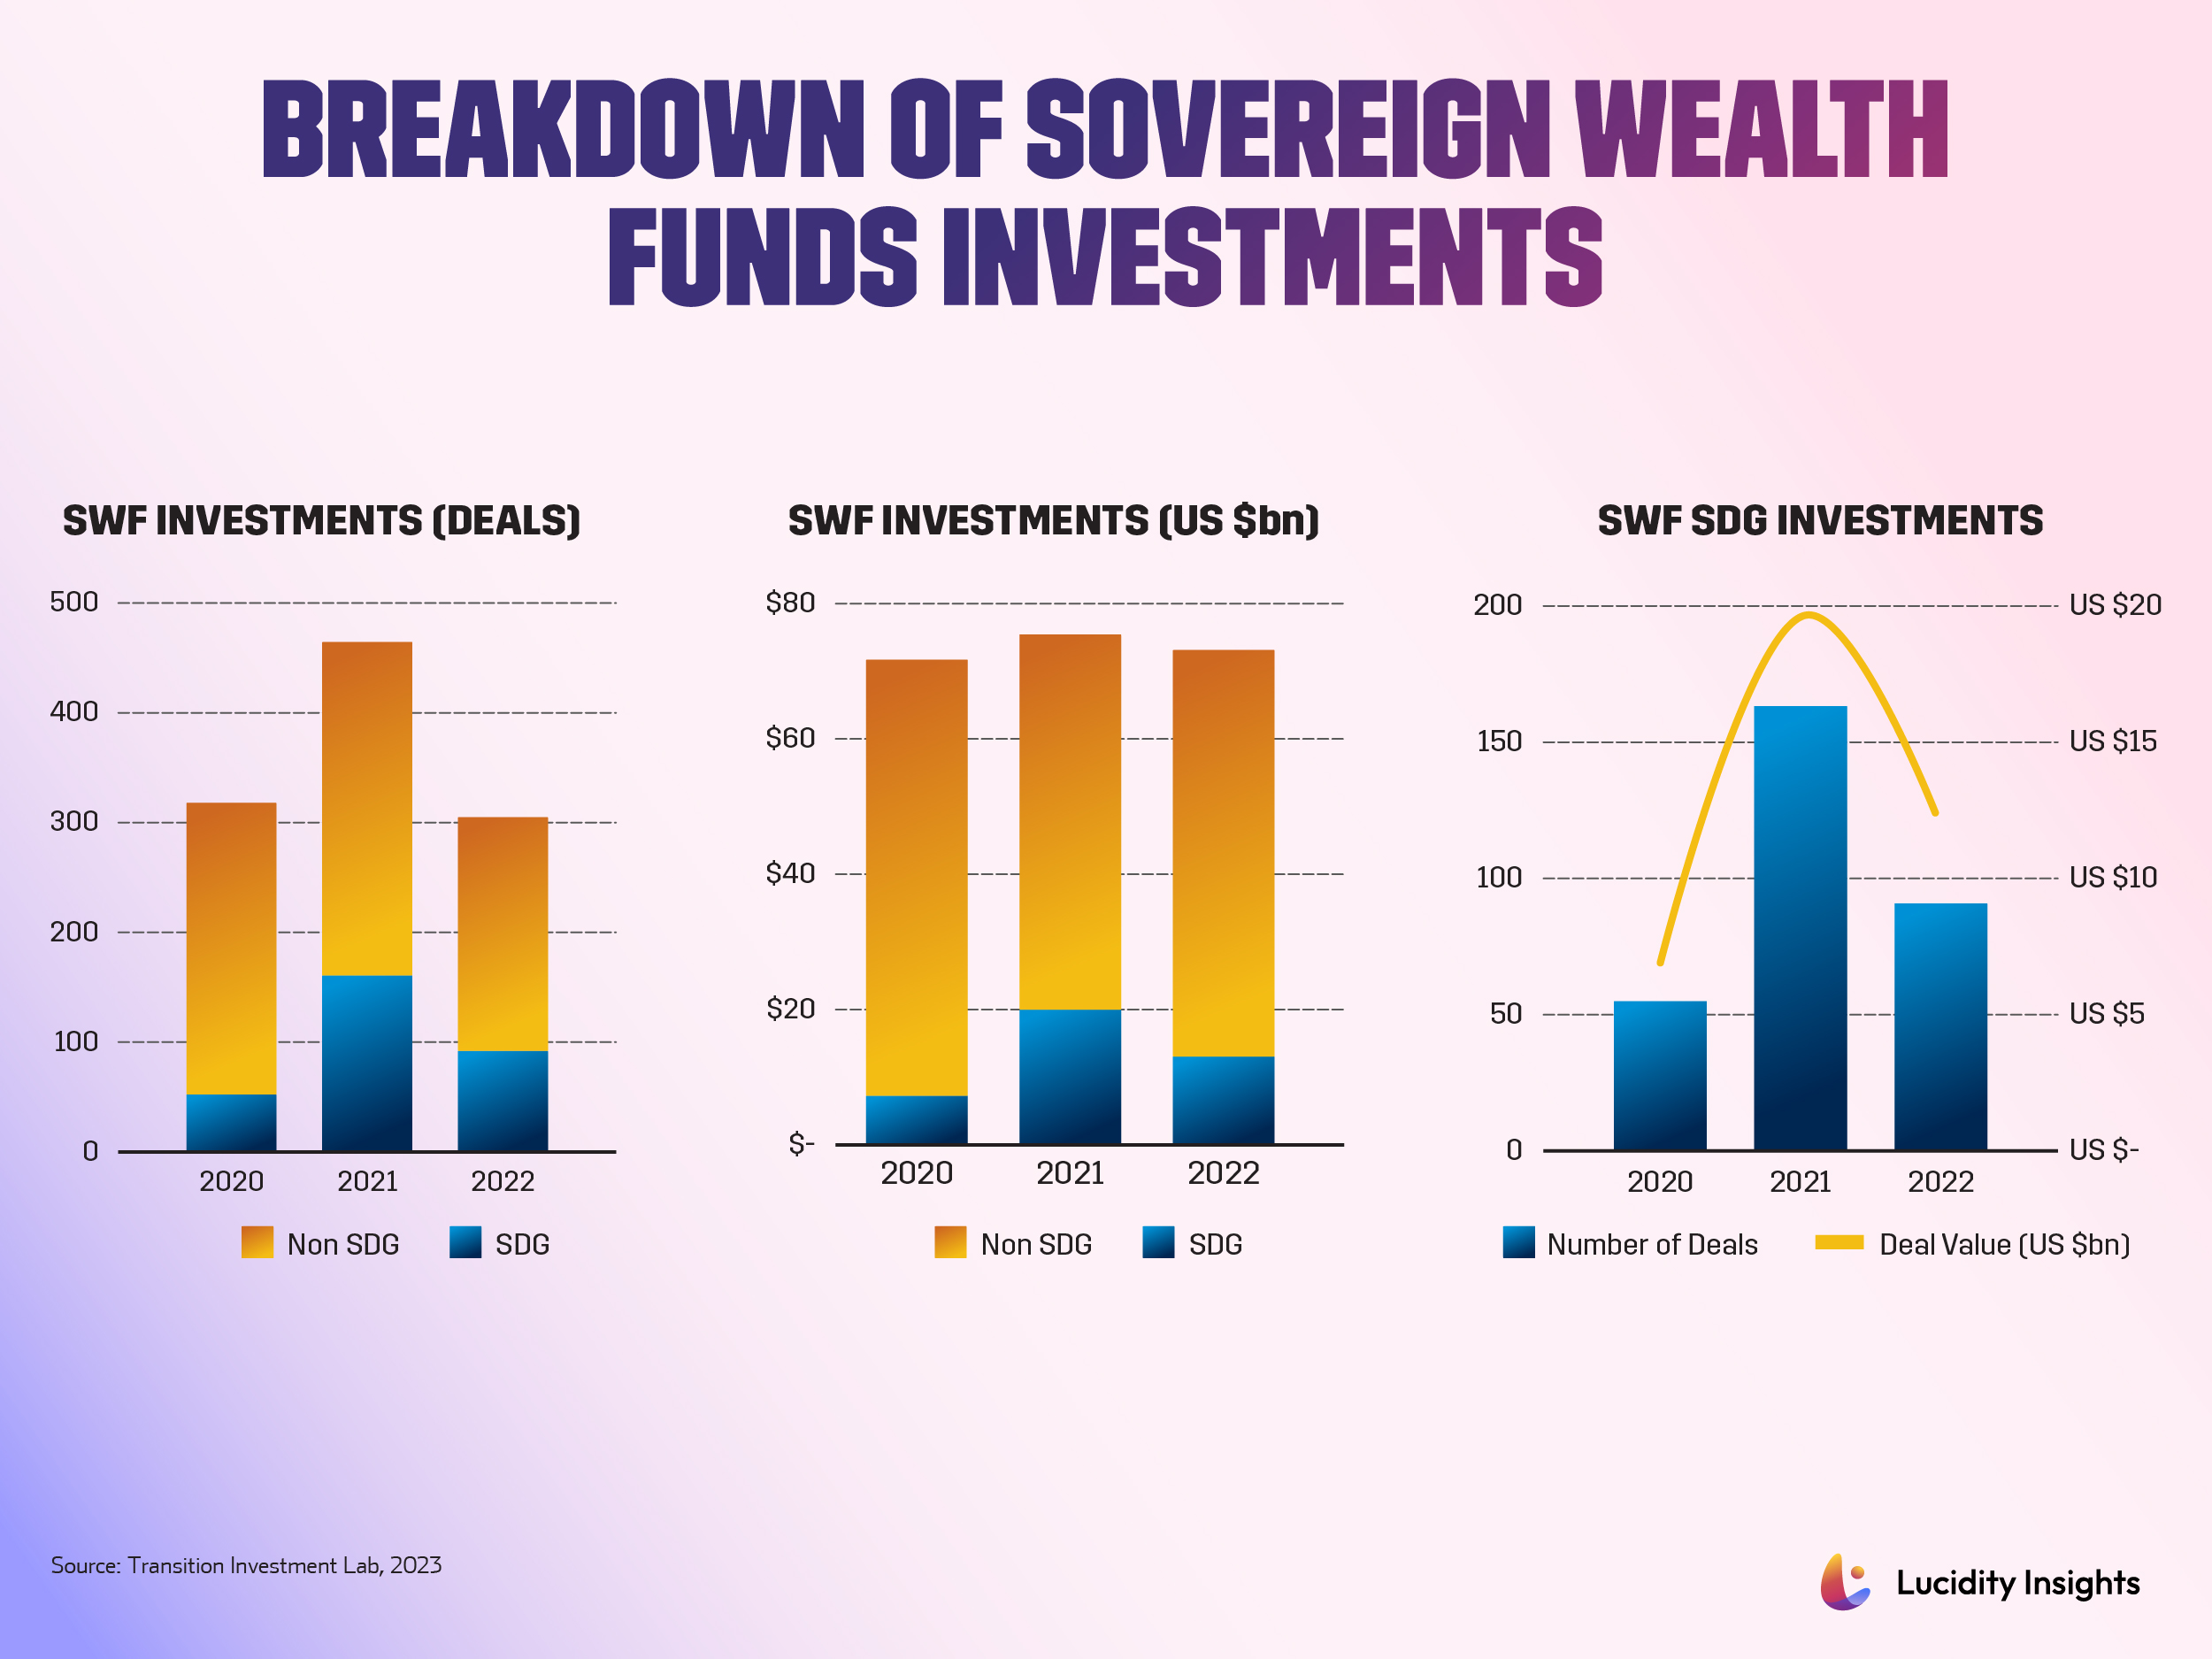 Breakdown of Sovereign Wealth Funds Investments